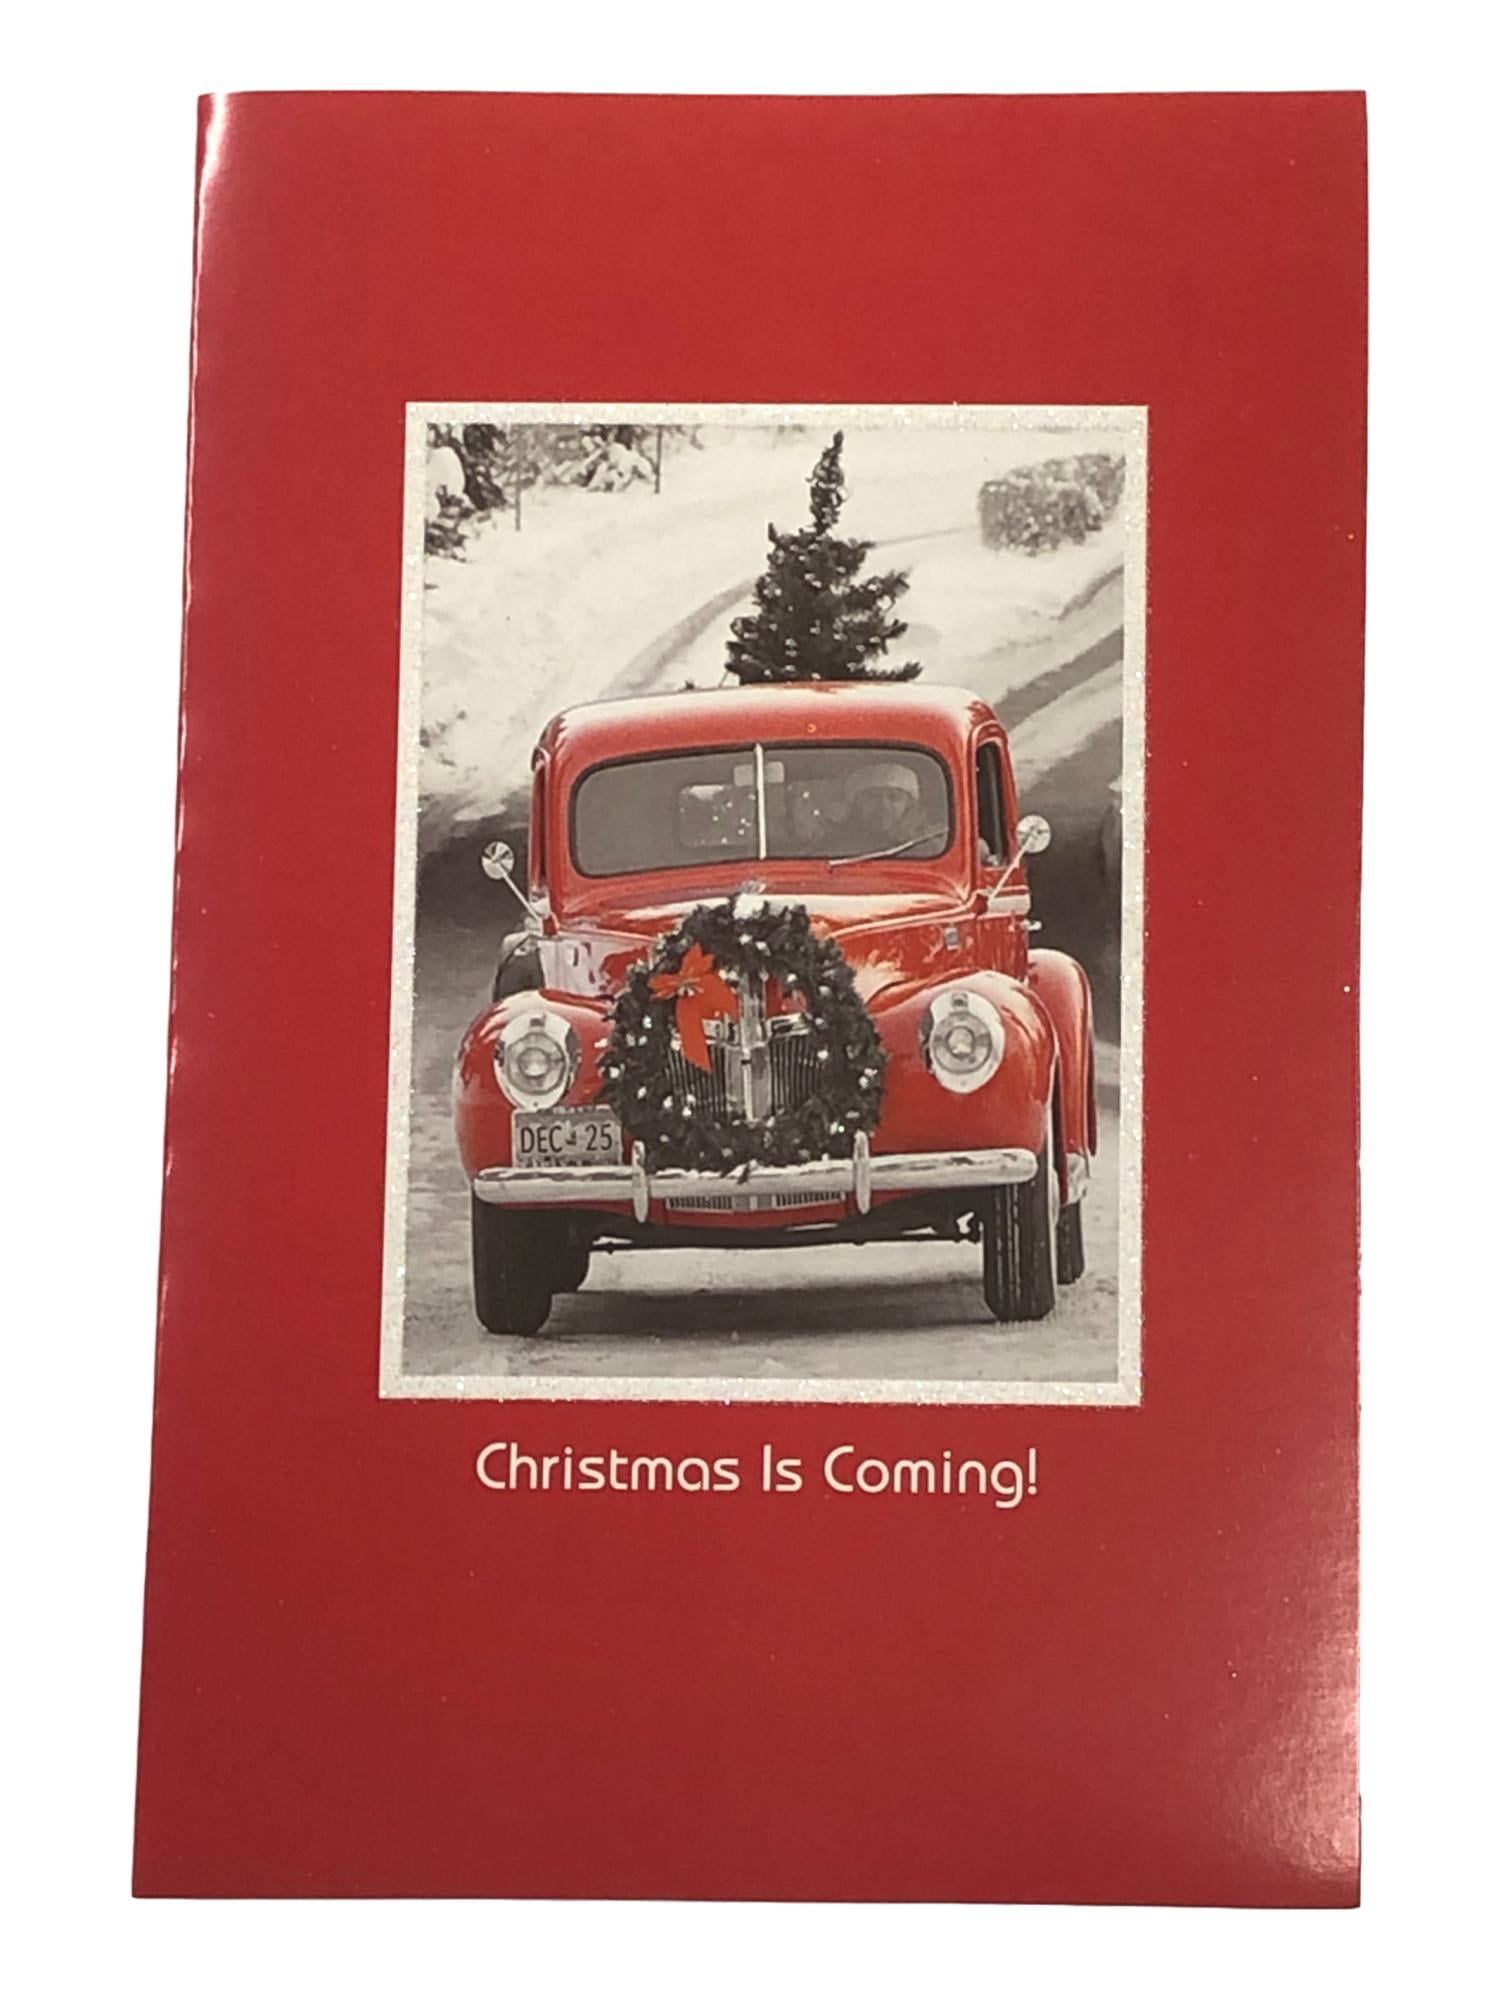 Old Red Truck Wreath Christmas Is Coming Holiday Cards Walmart Com Walmart Com